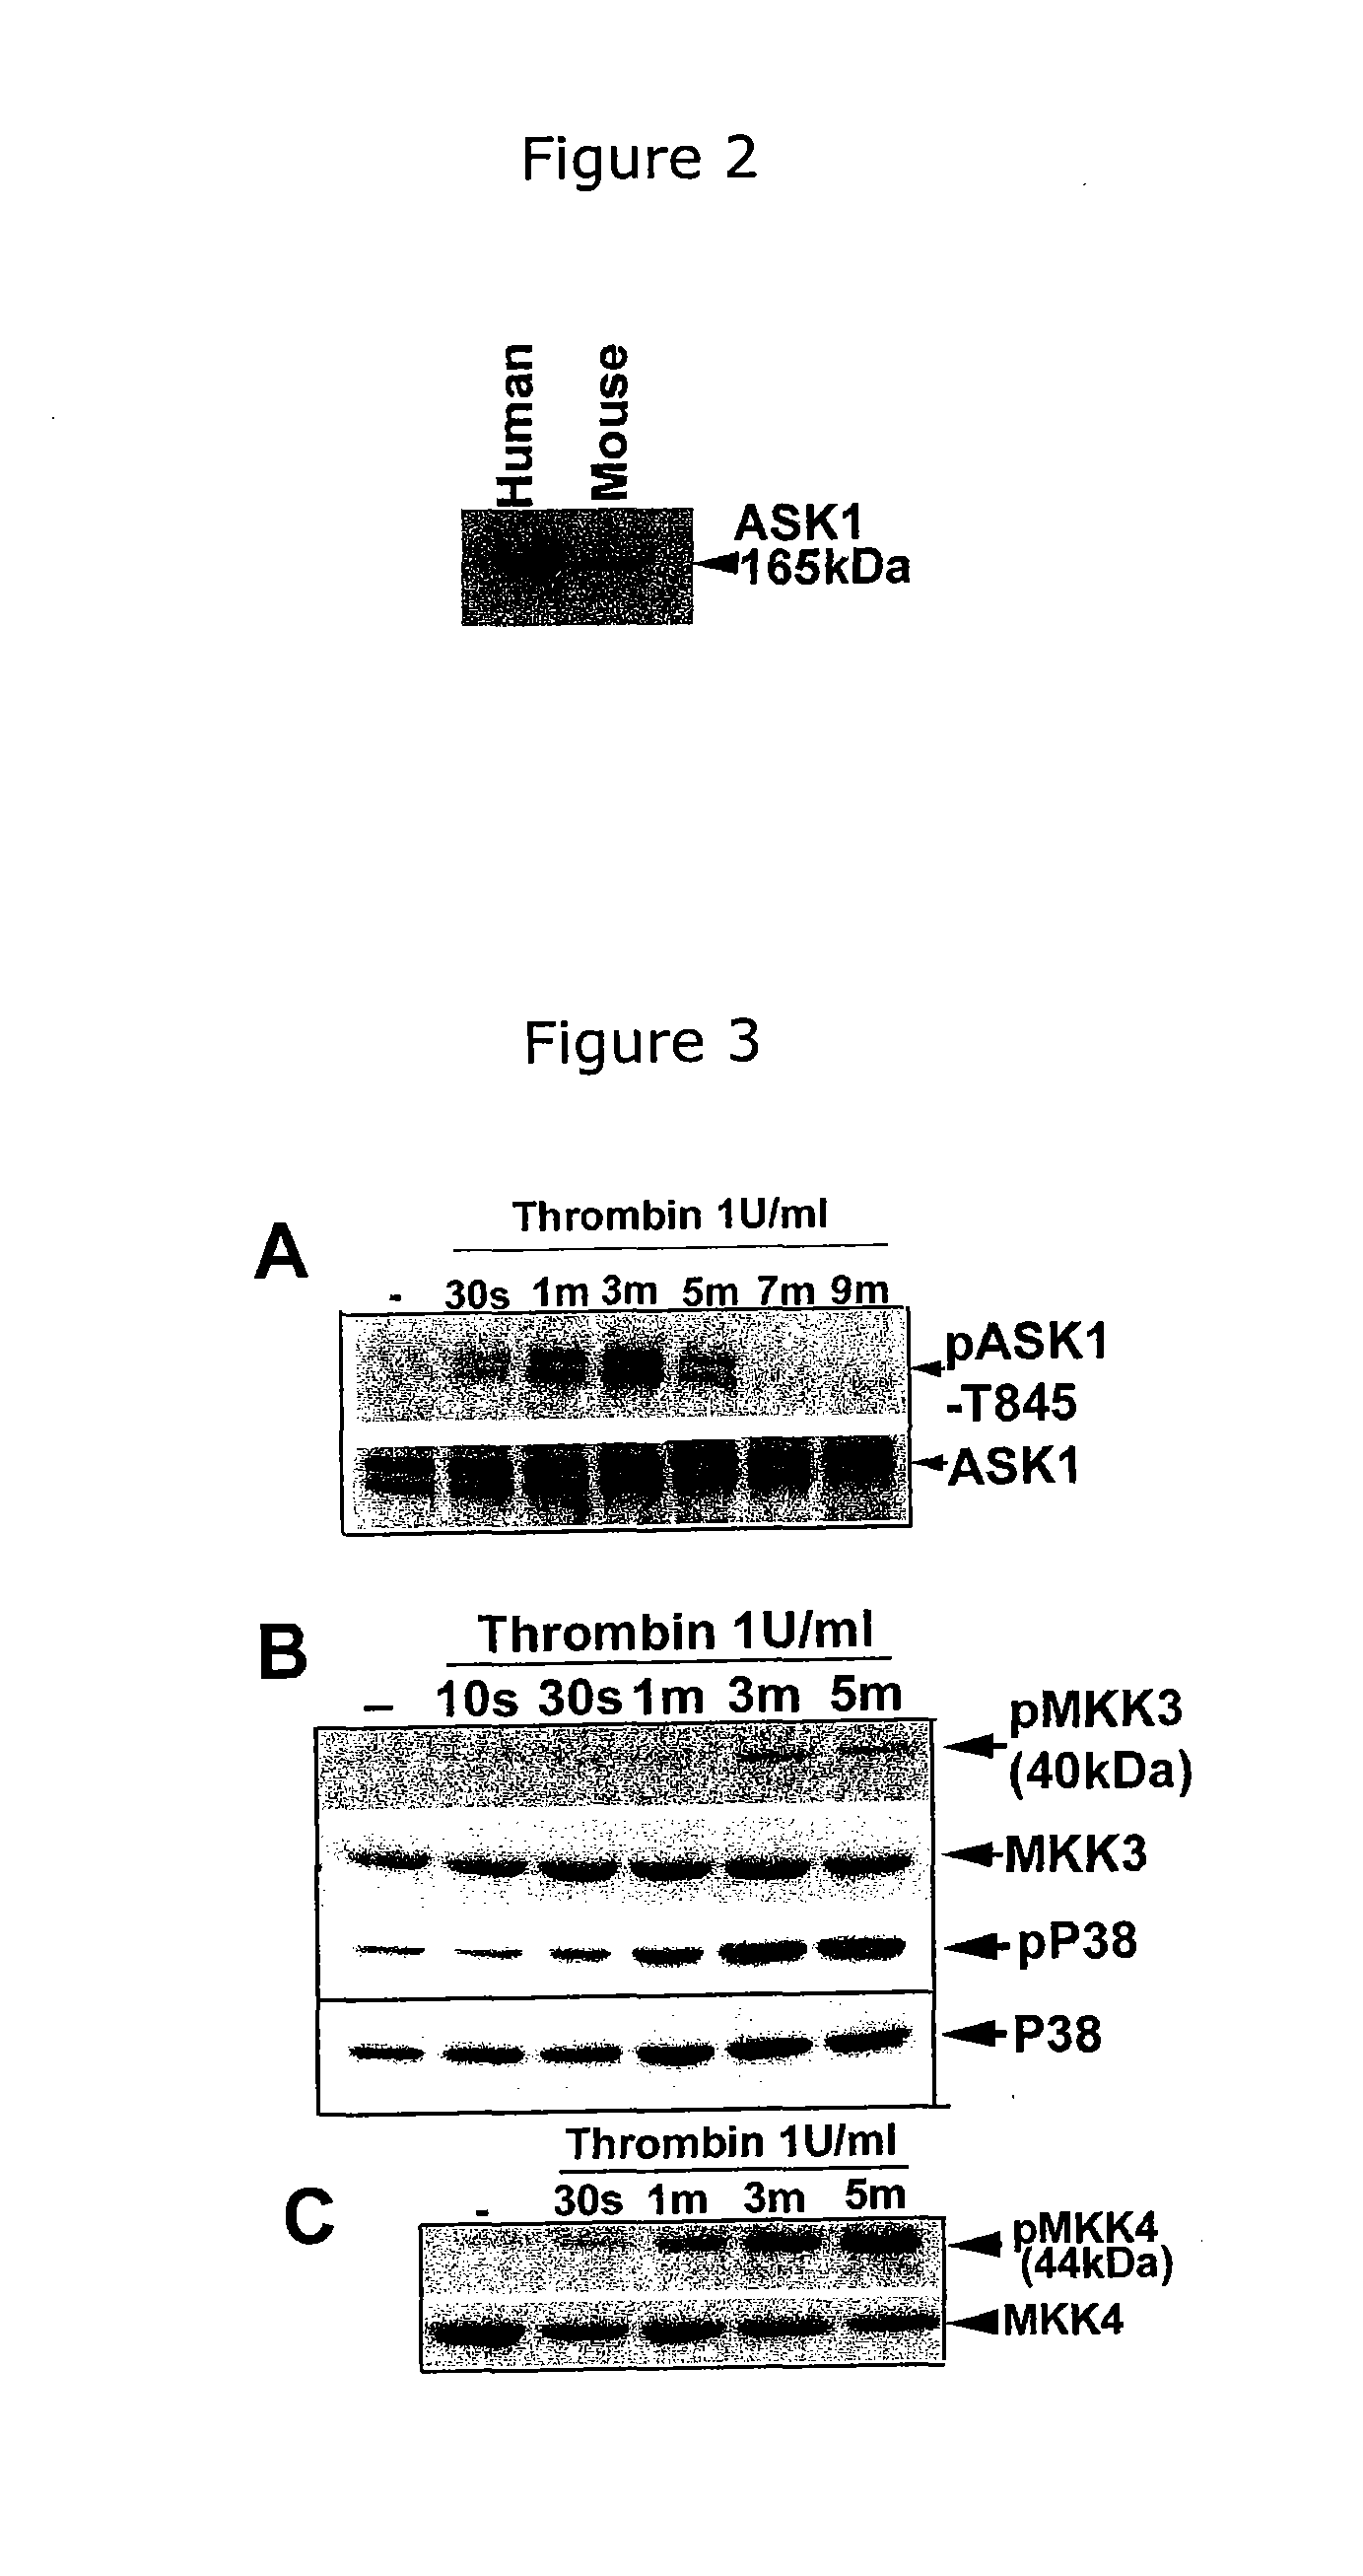 Methods of treating and preventing thrombotic diseases using ask1 inhibitors